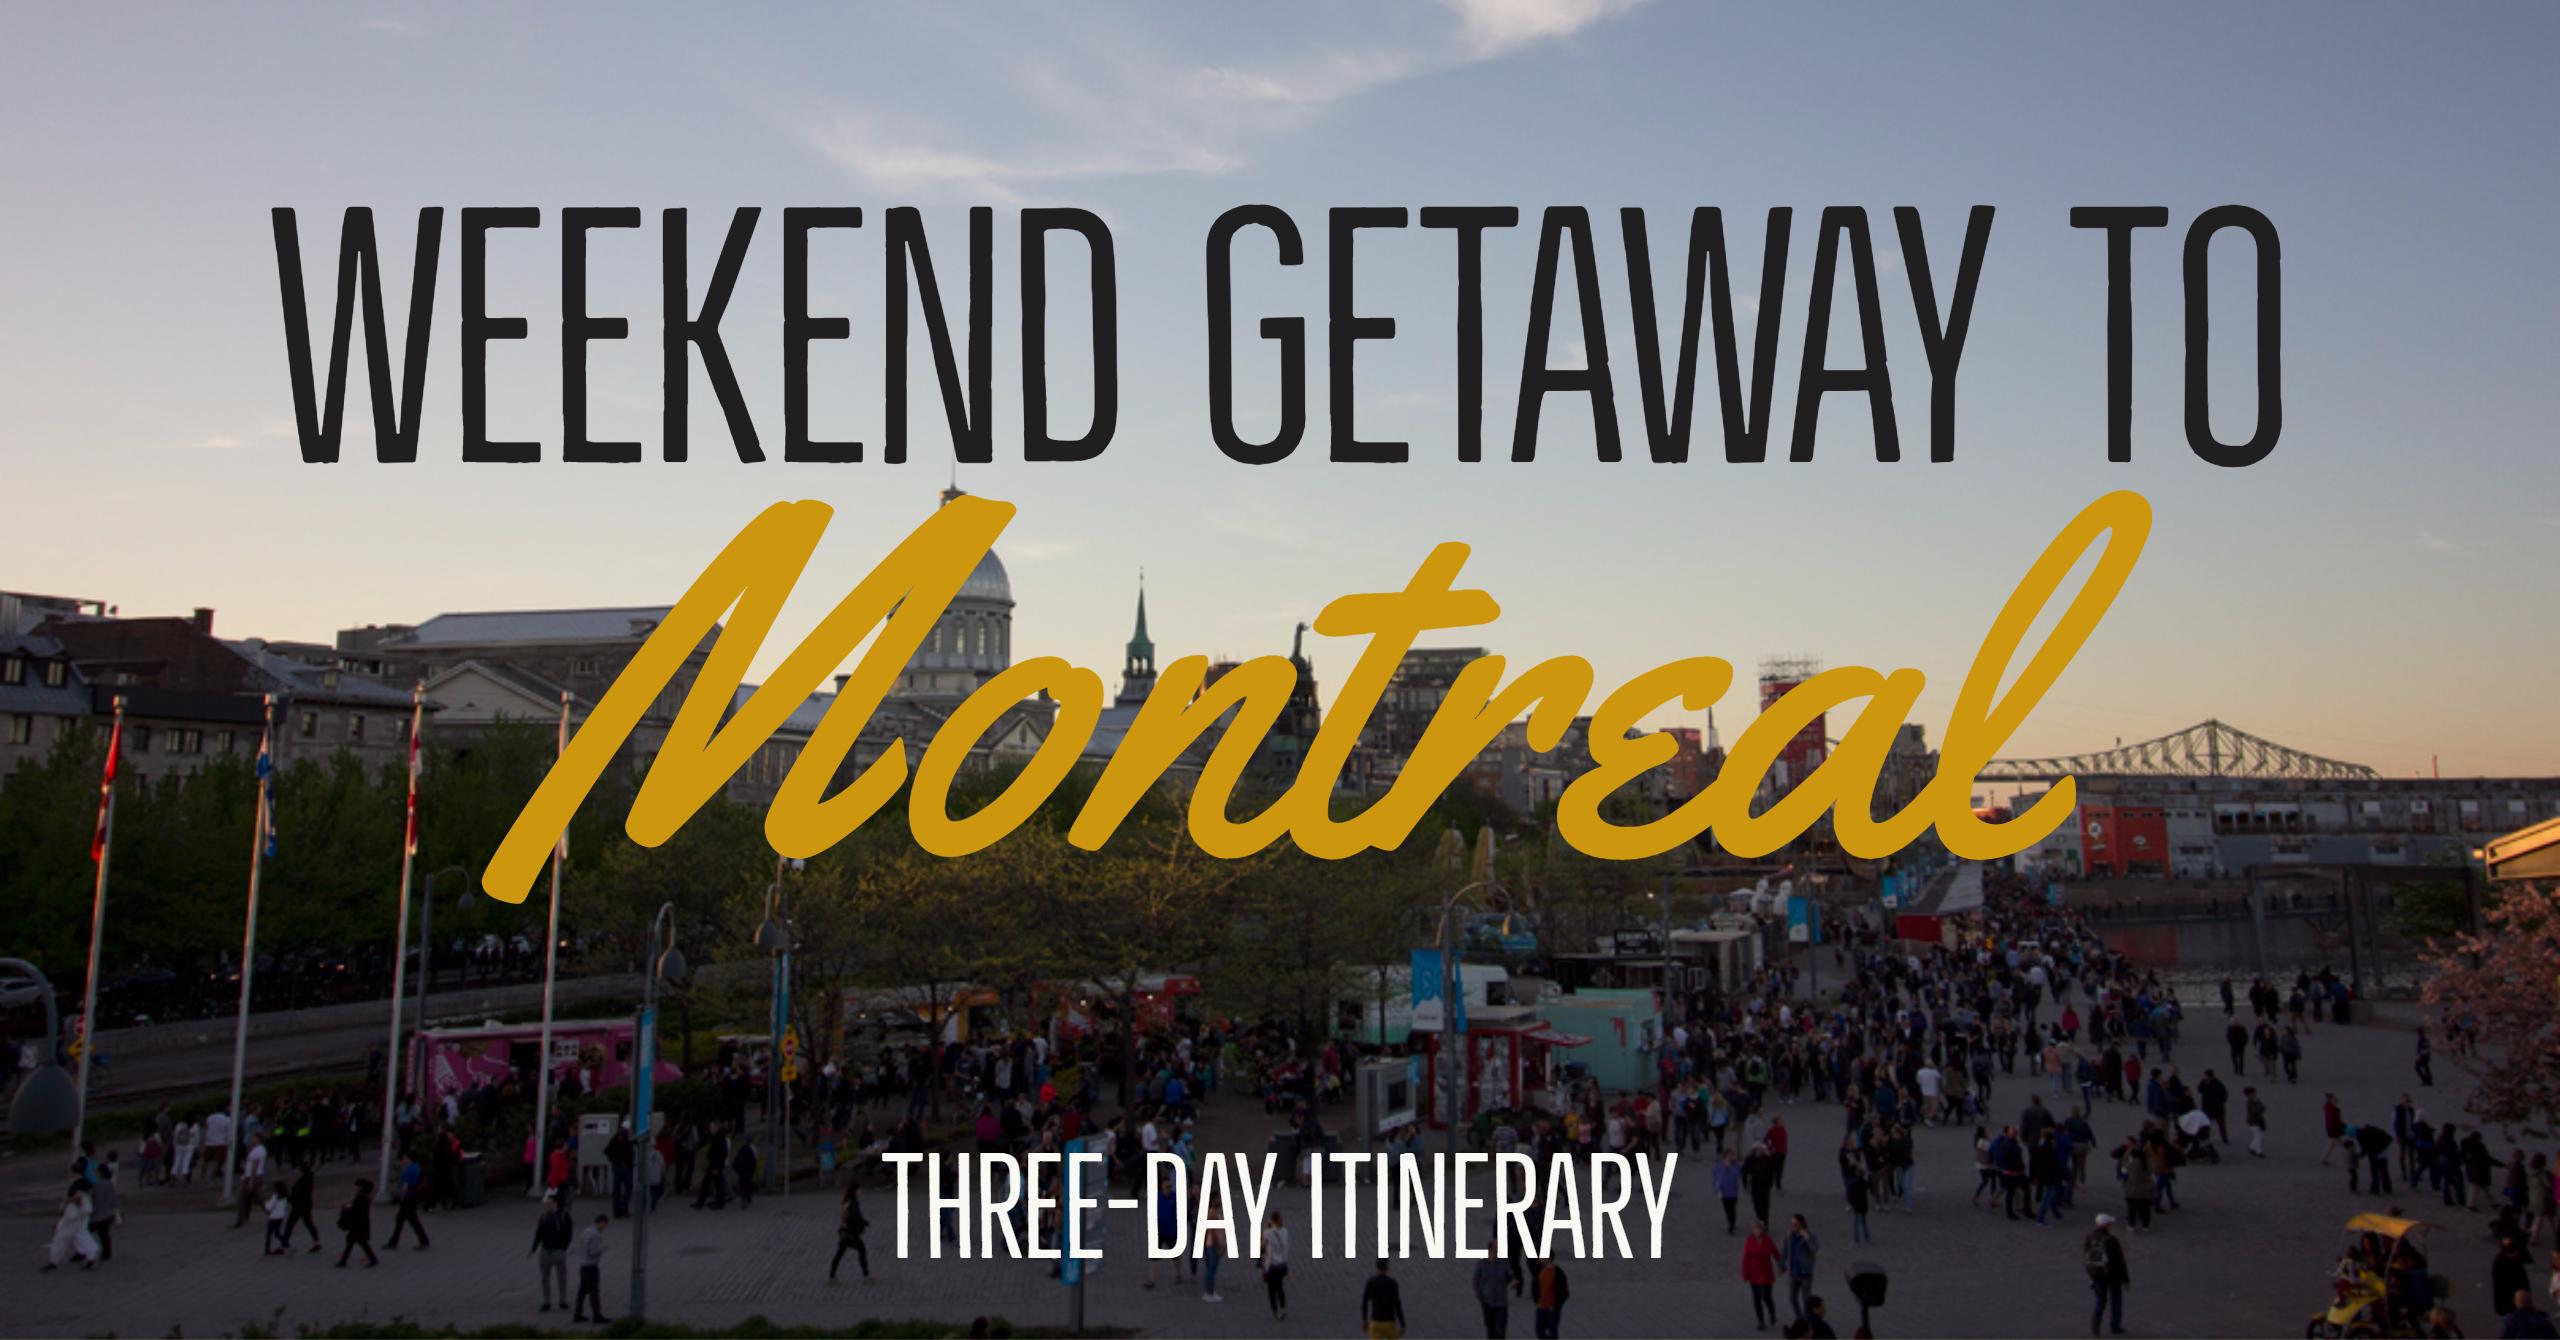 Pack up for the weekend and getaway to lovely Montreal - Three-day Montreal itinerary | My Wandering Voyage travel blog